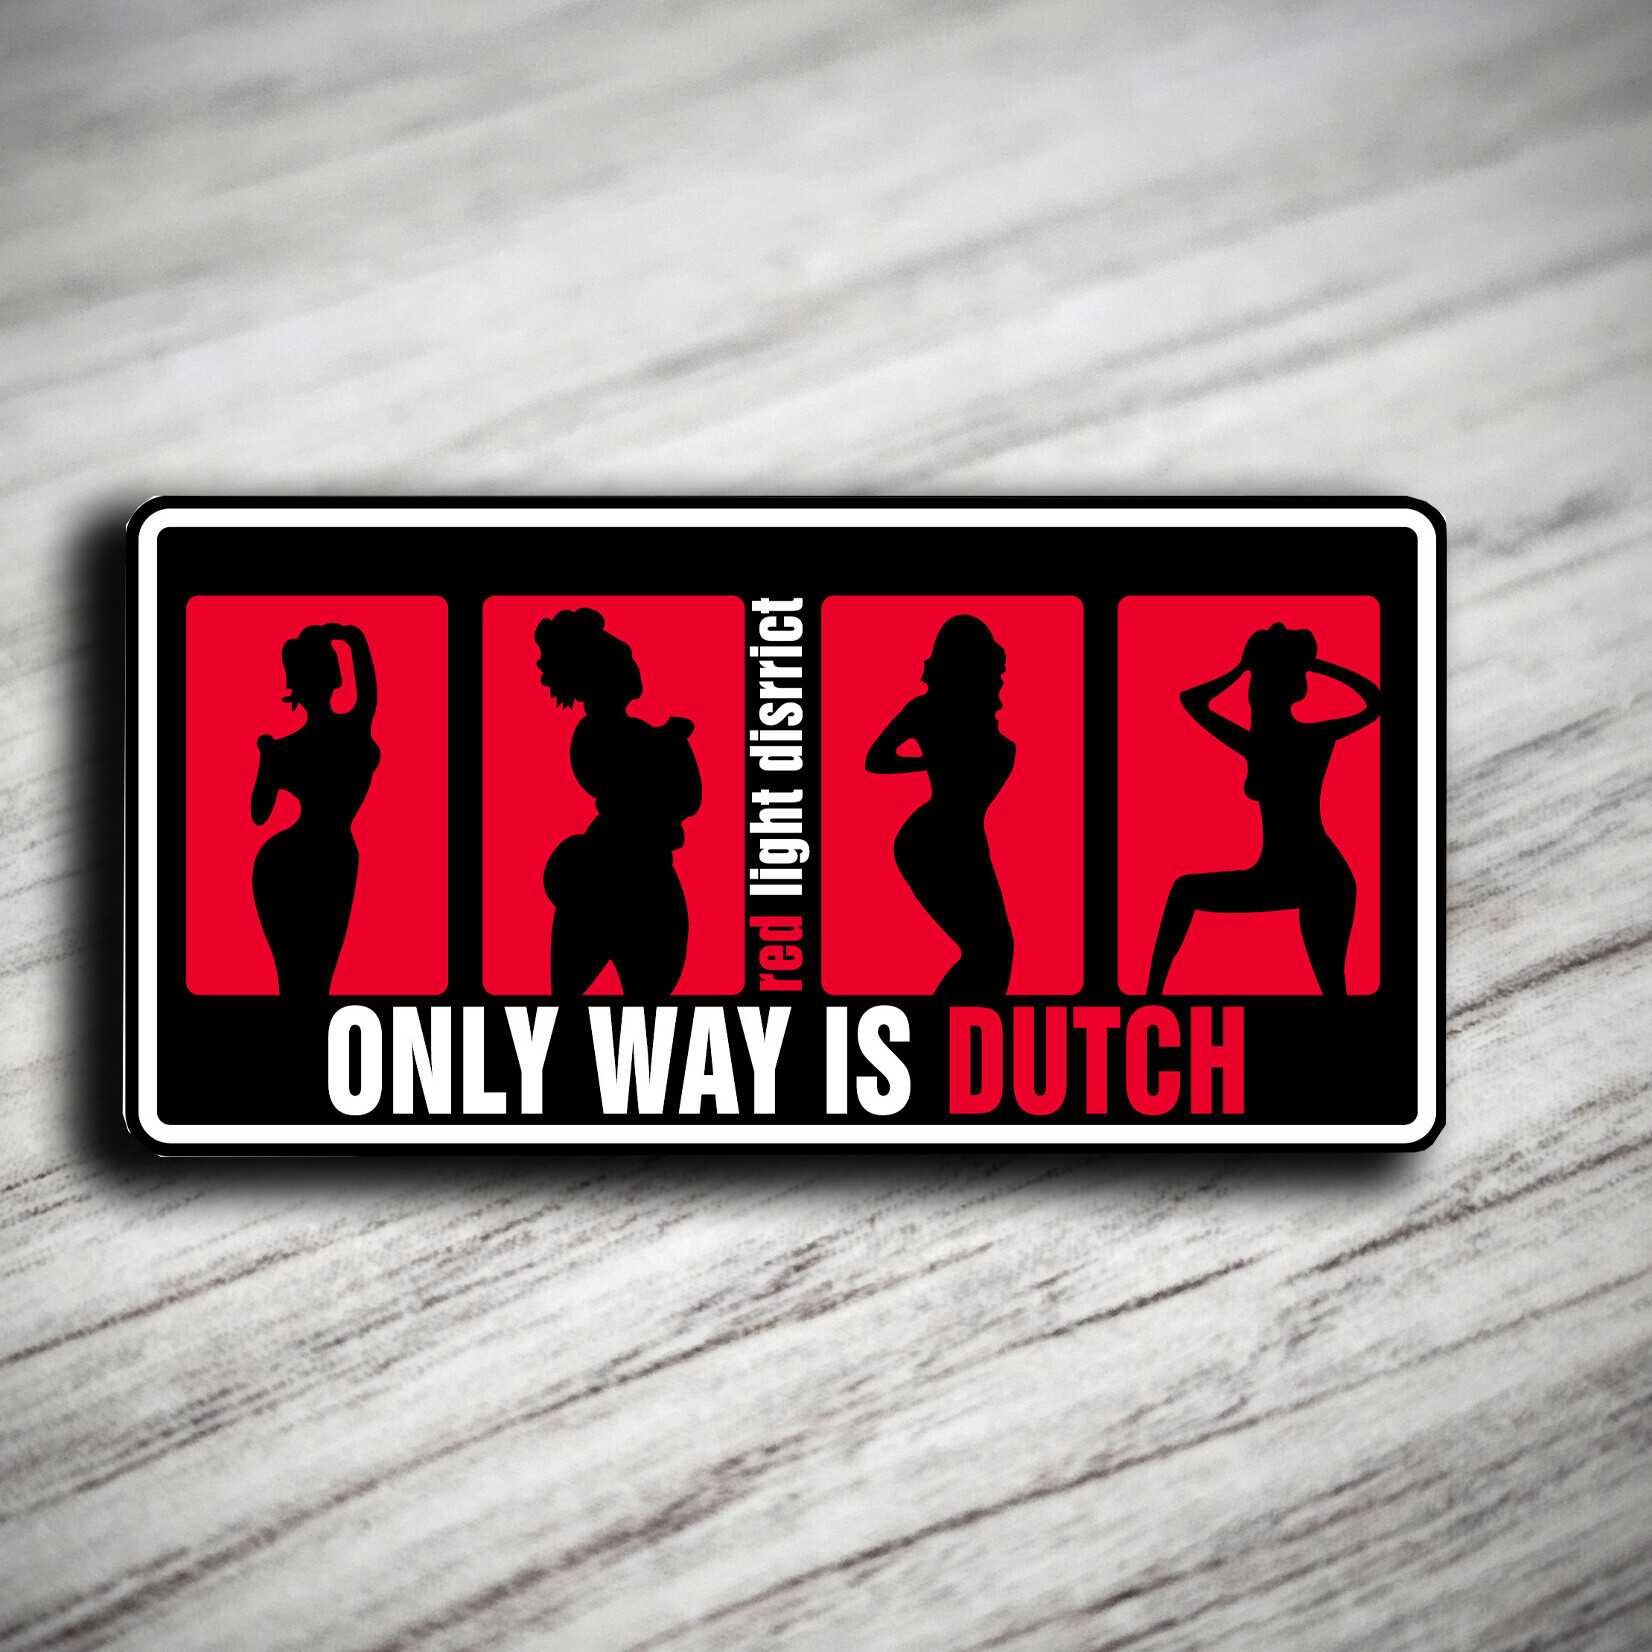 ONLY WAY IS DUTCH Only Way Is Dutch Pin - Red Light District